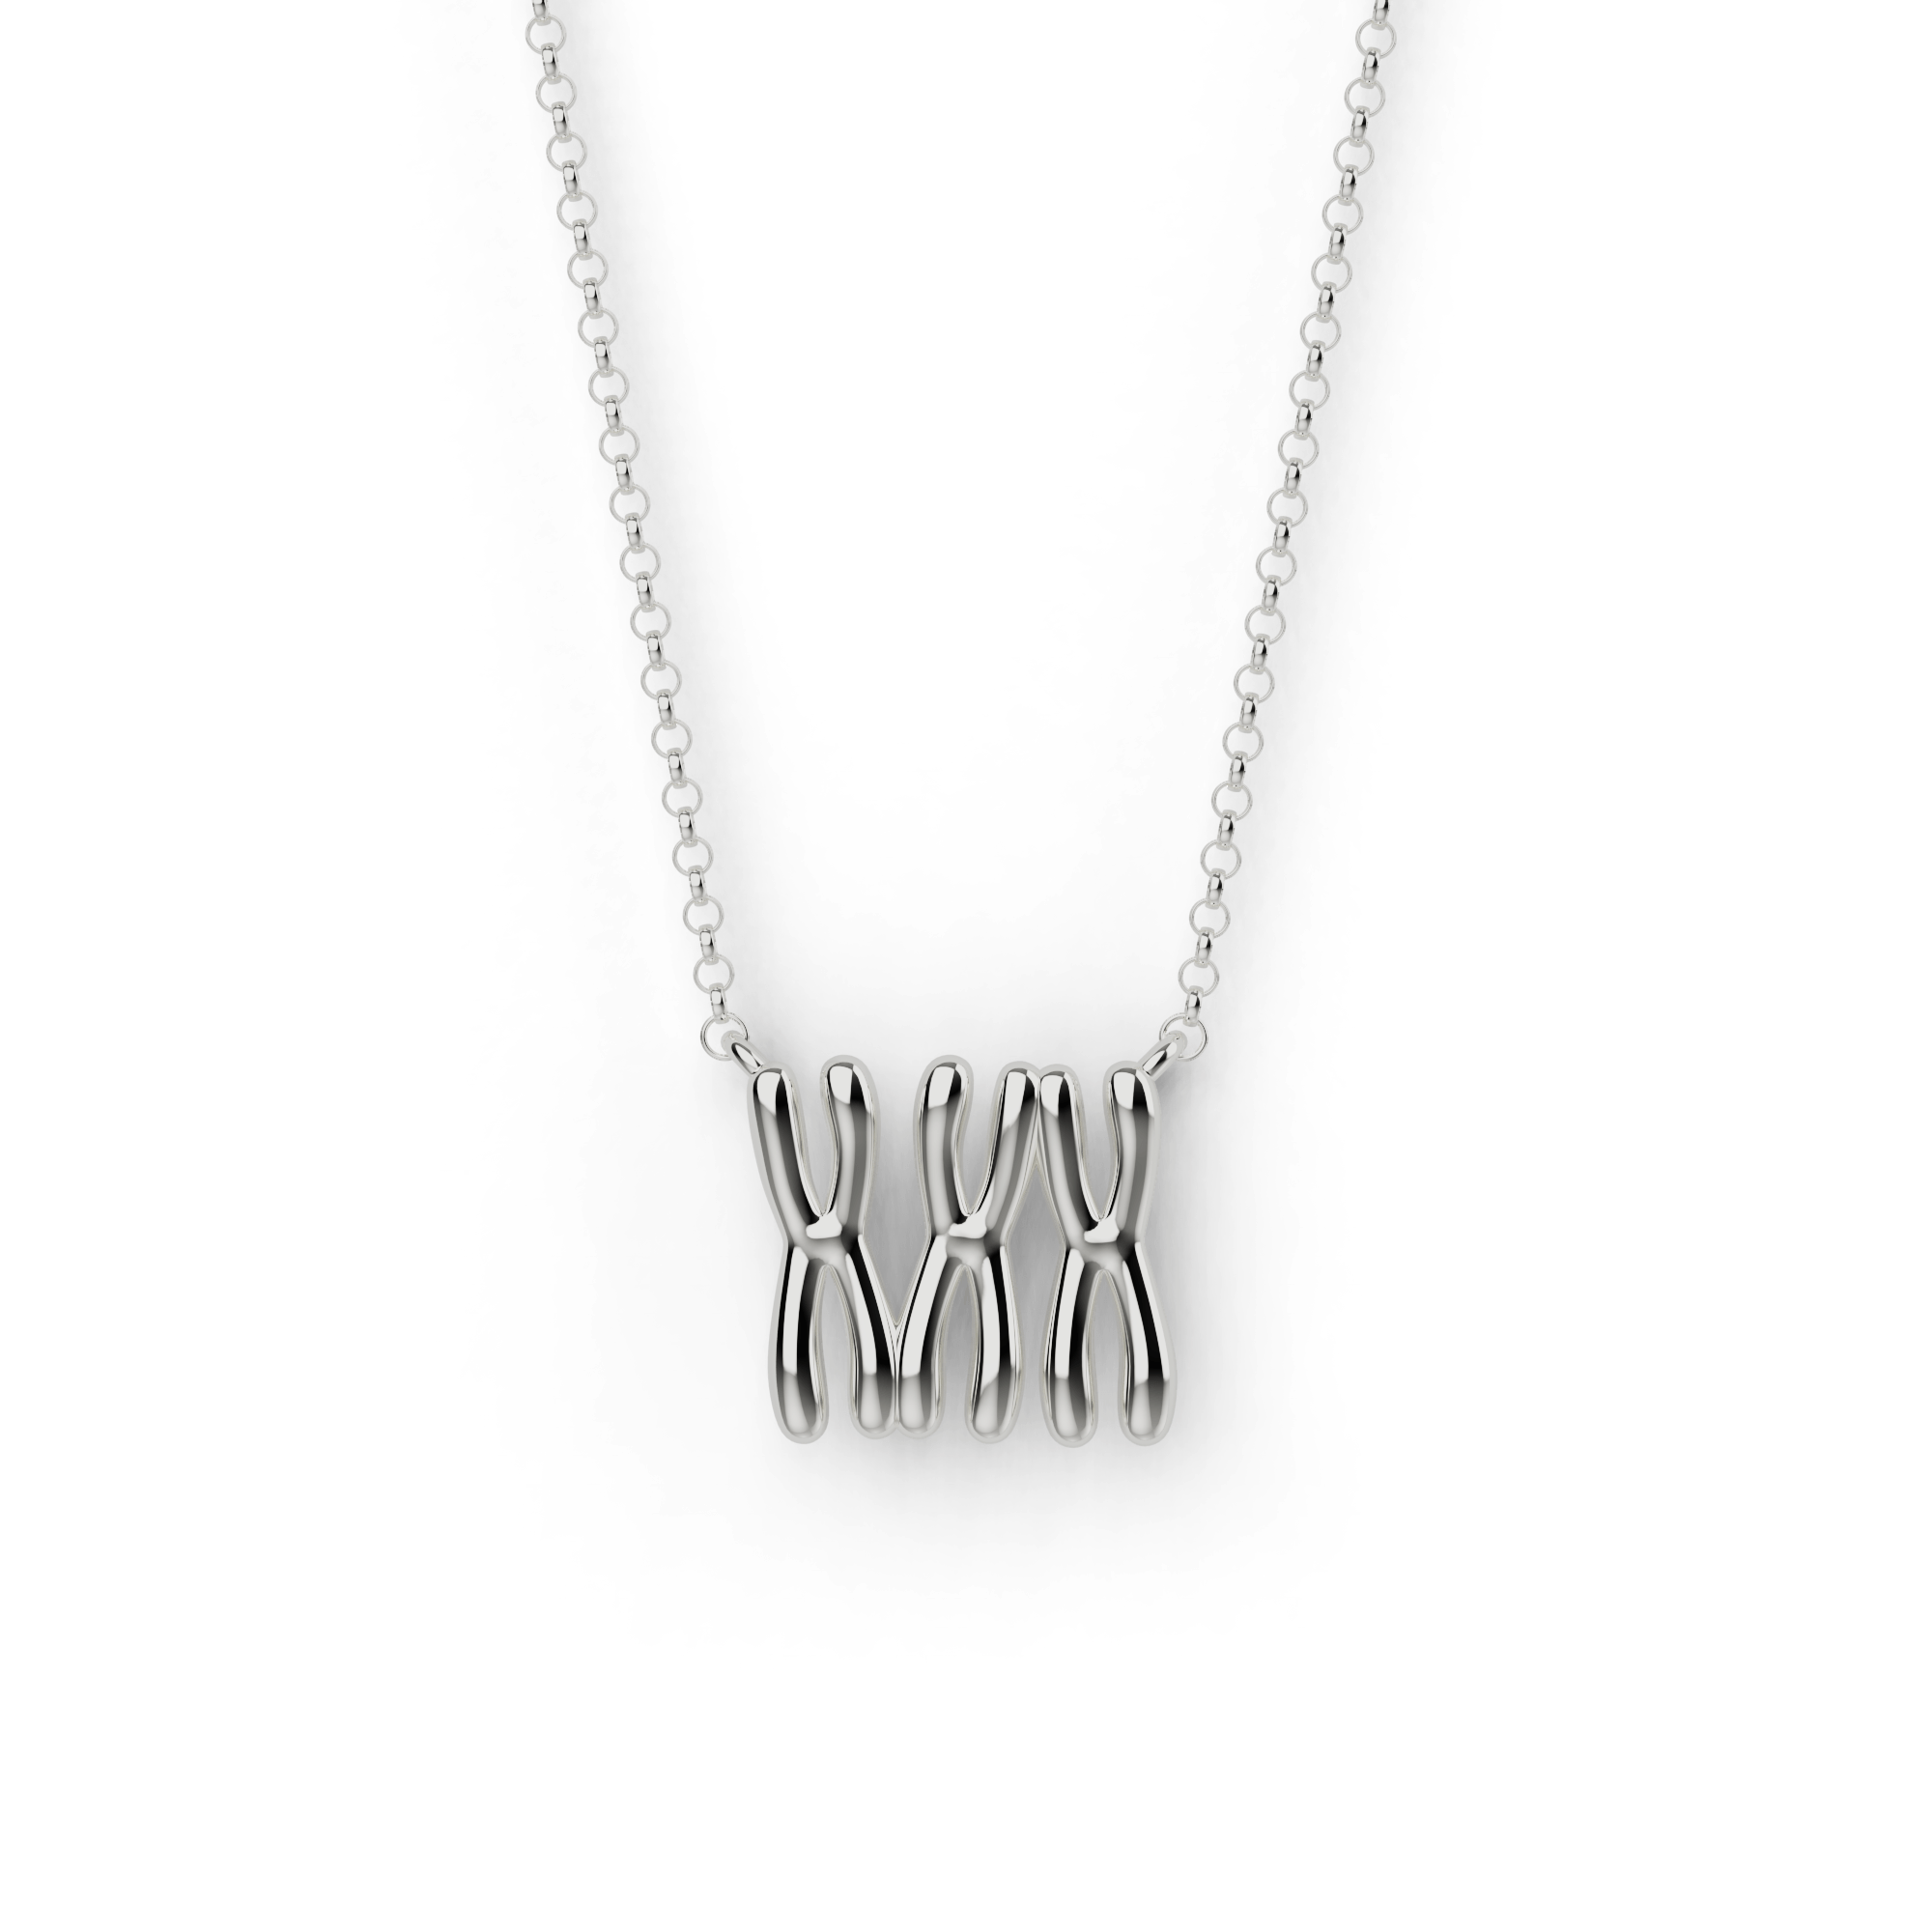 trisomy 21 - Down syndrome necklace | silver